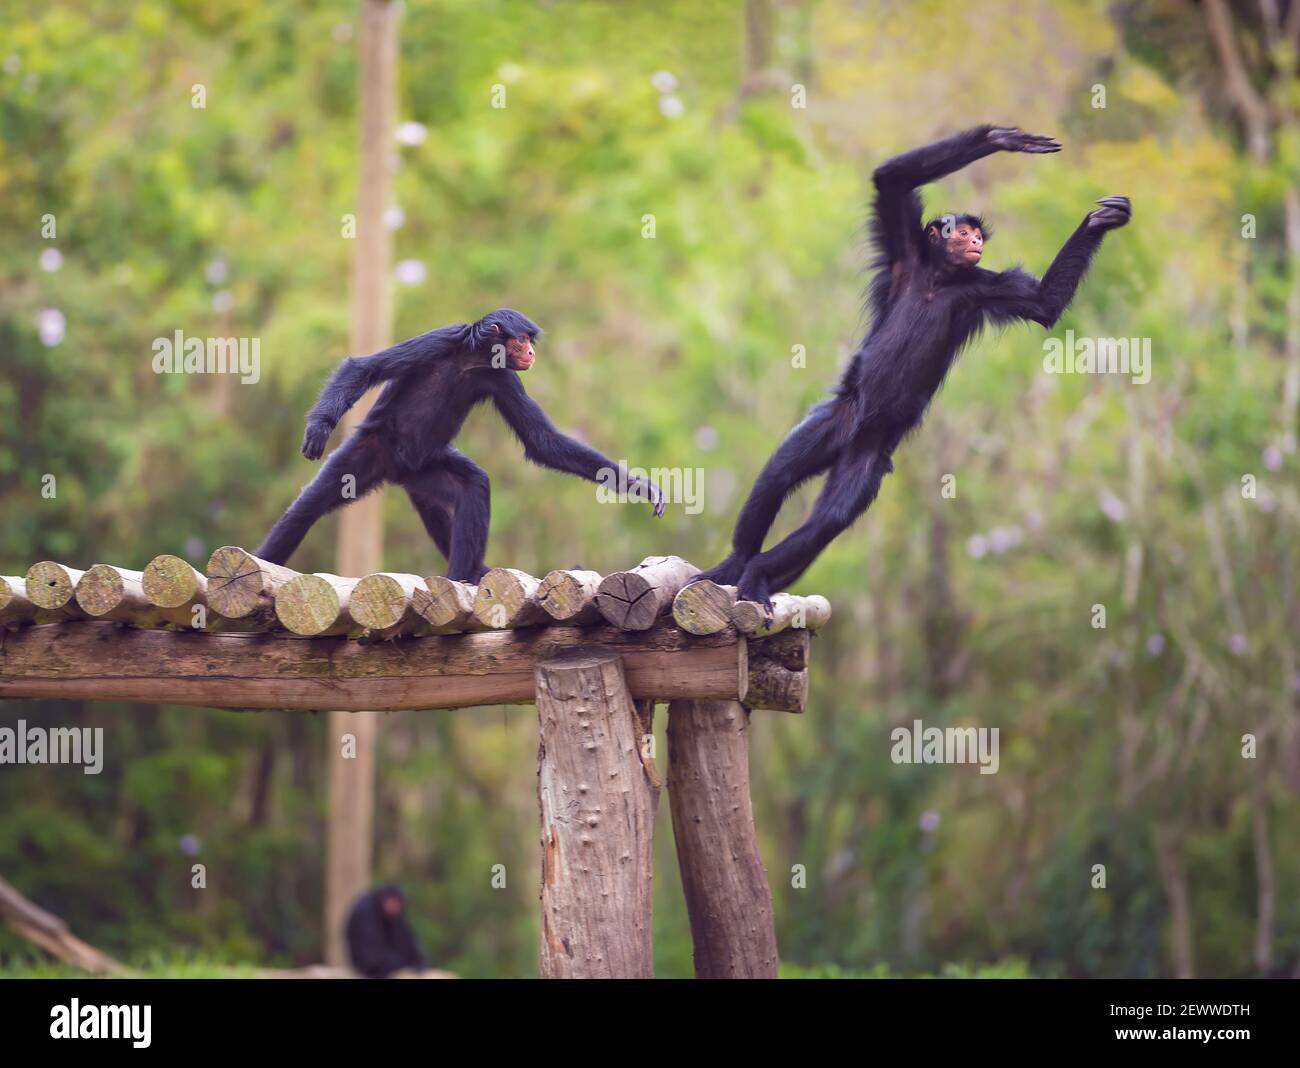 Couple of monkeys having fun in the middle of the forest. Stock Photo